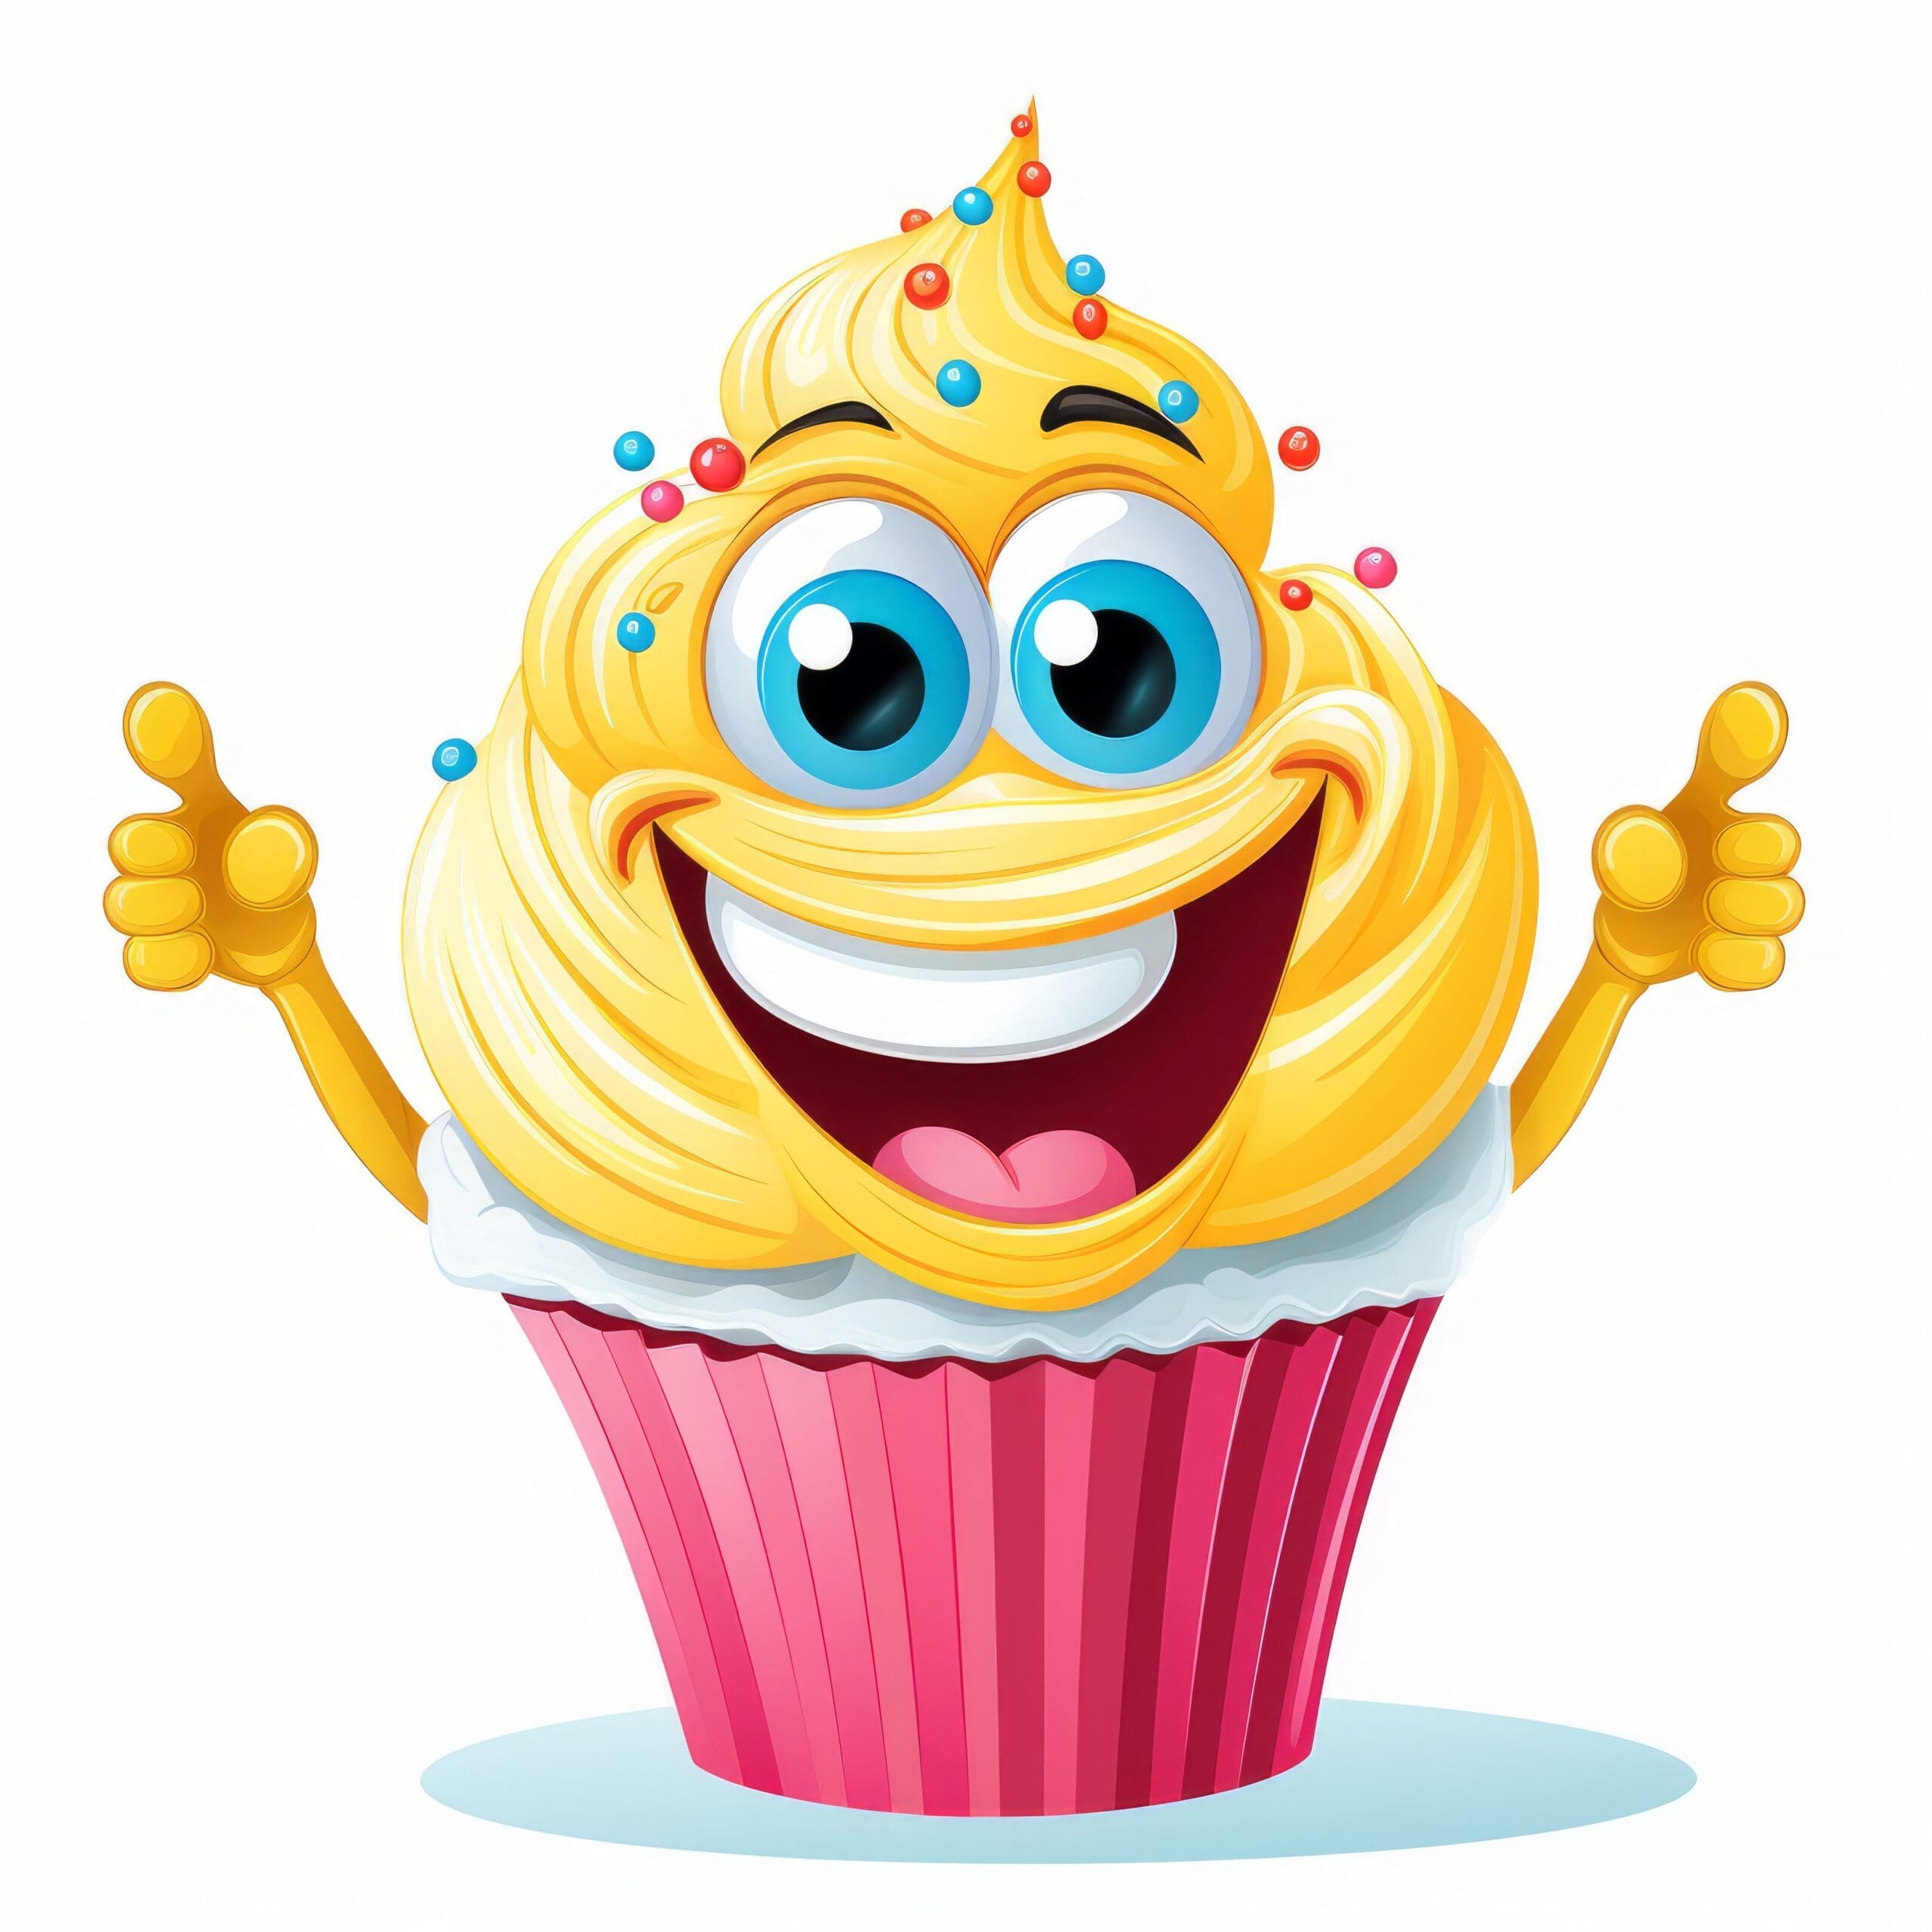 Cartoon graphic of a happy cupcake with a chef’s hat and a smile on a dessert-themed background.